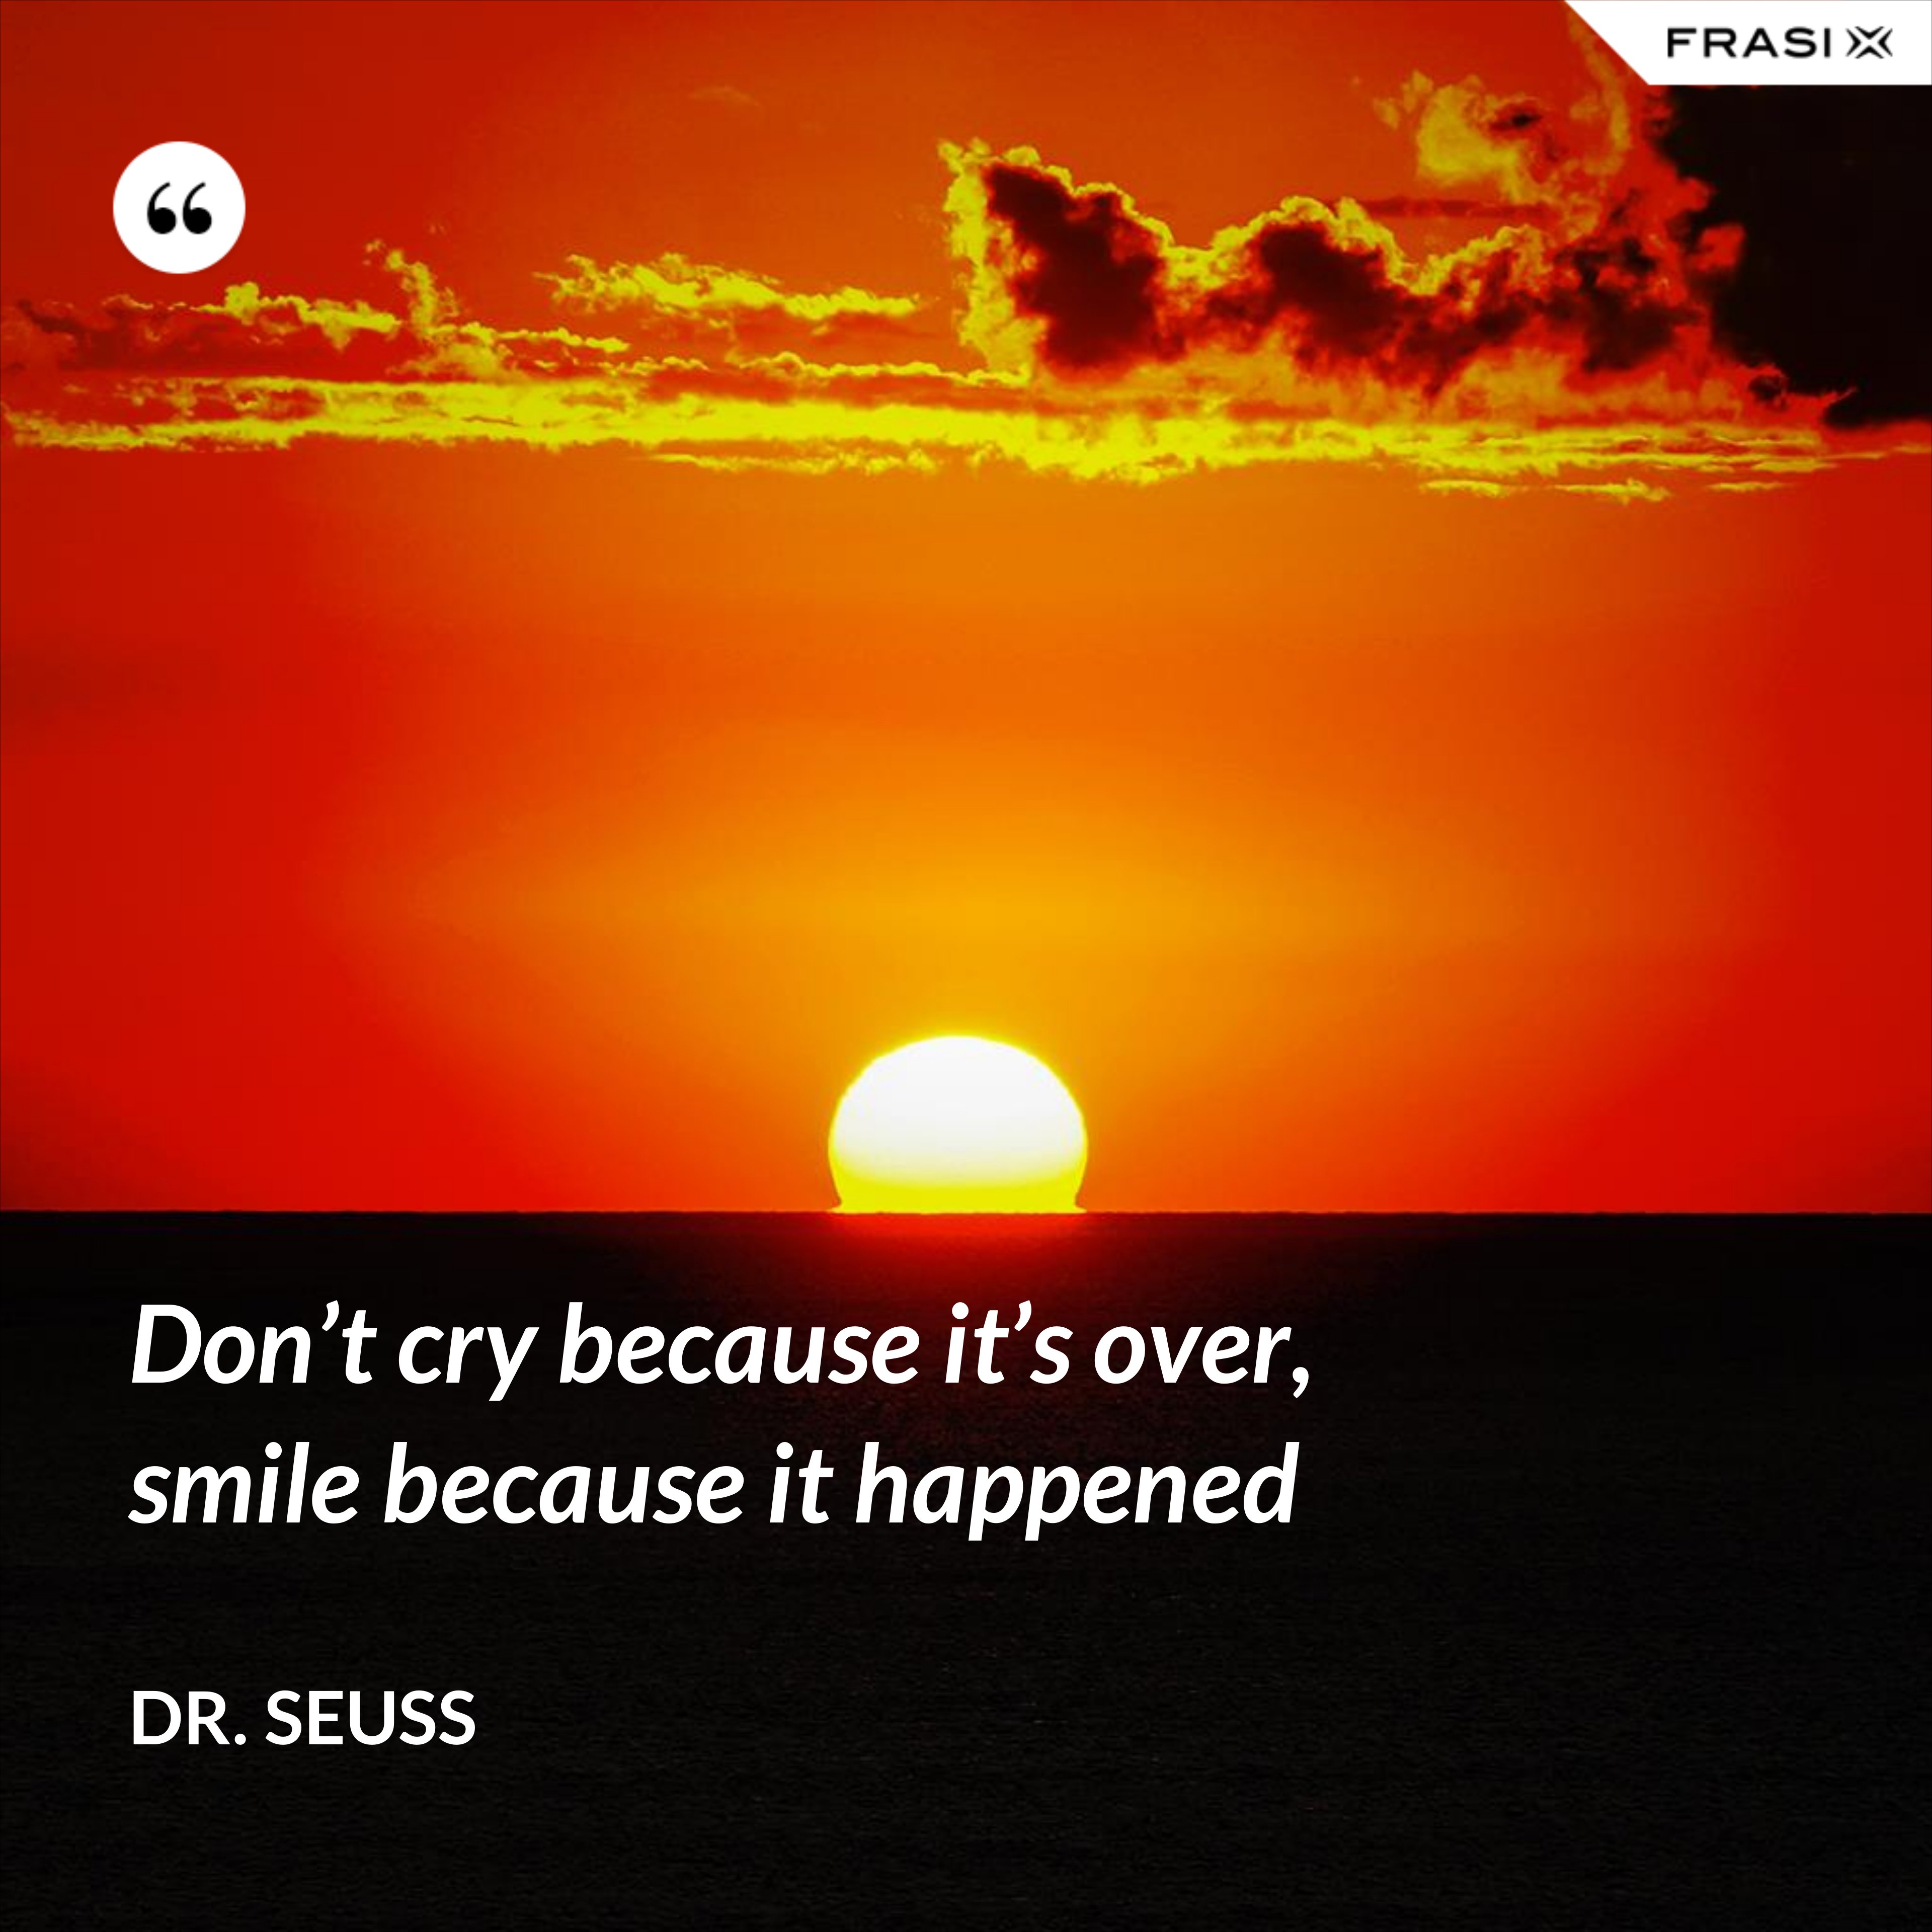 Don’t cry because it’s over, smile because it happened - Dr. Seuss